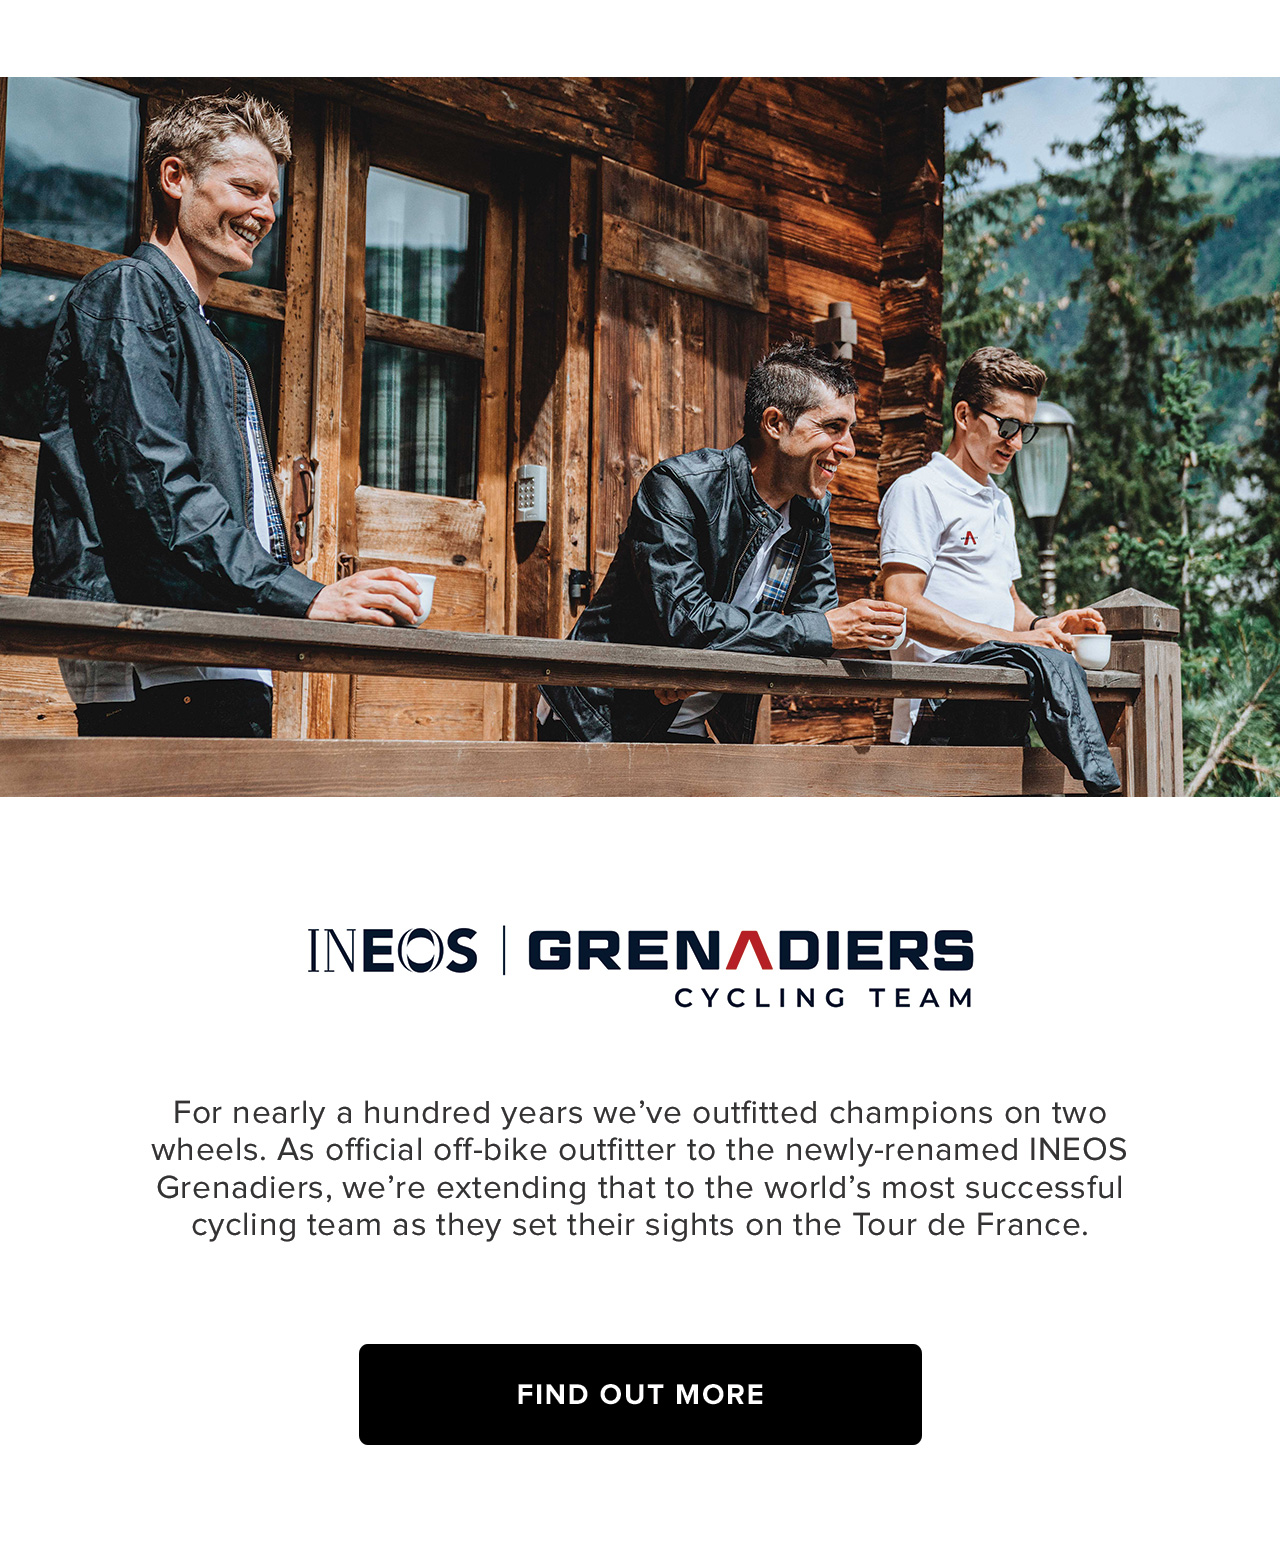 Belstaff has been outfitting adventurous spirits since 1924 and we're proud to partner, as official outfitter, with Ineos Grenadiers as the riders set their sights on the Tour de France.	